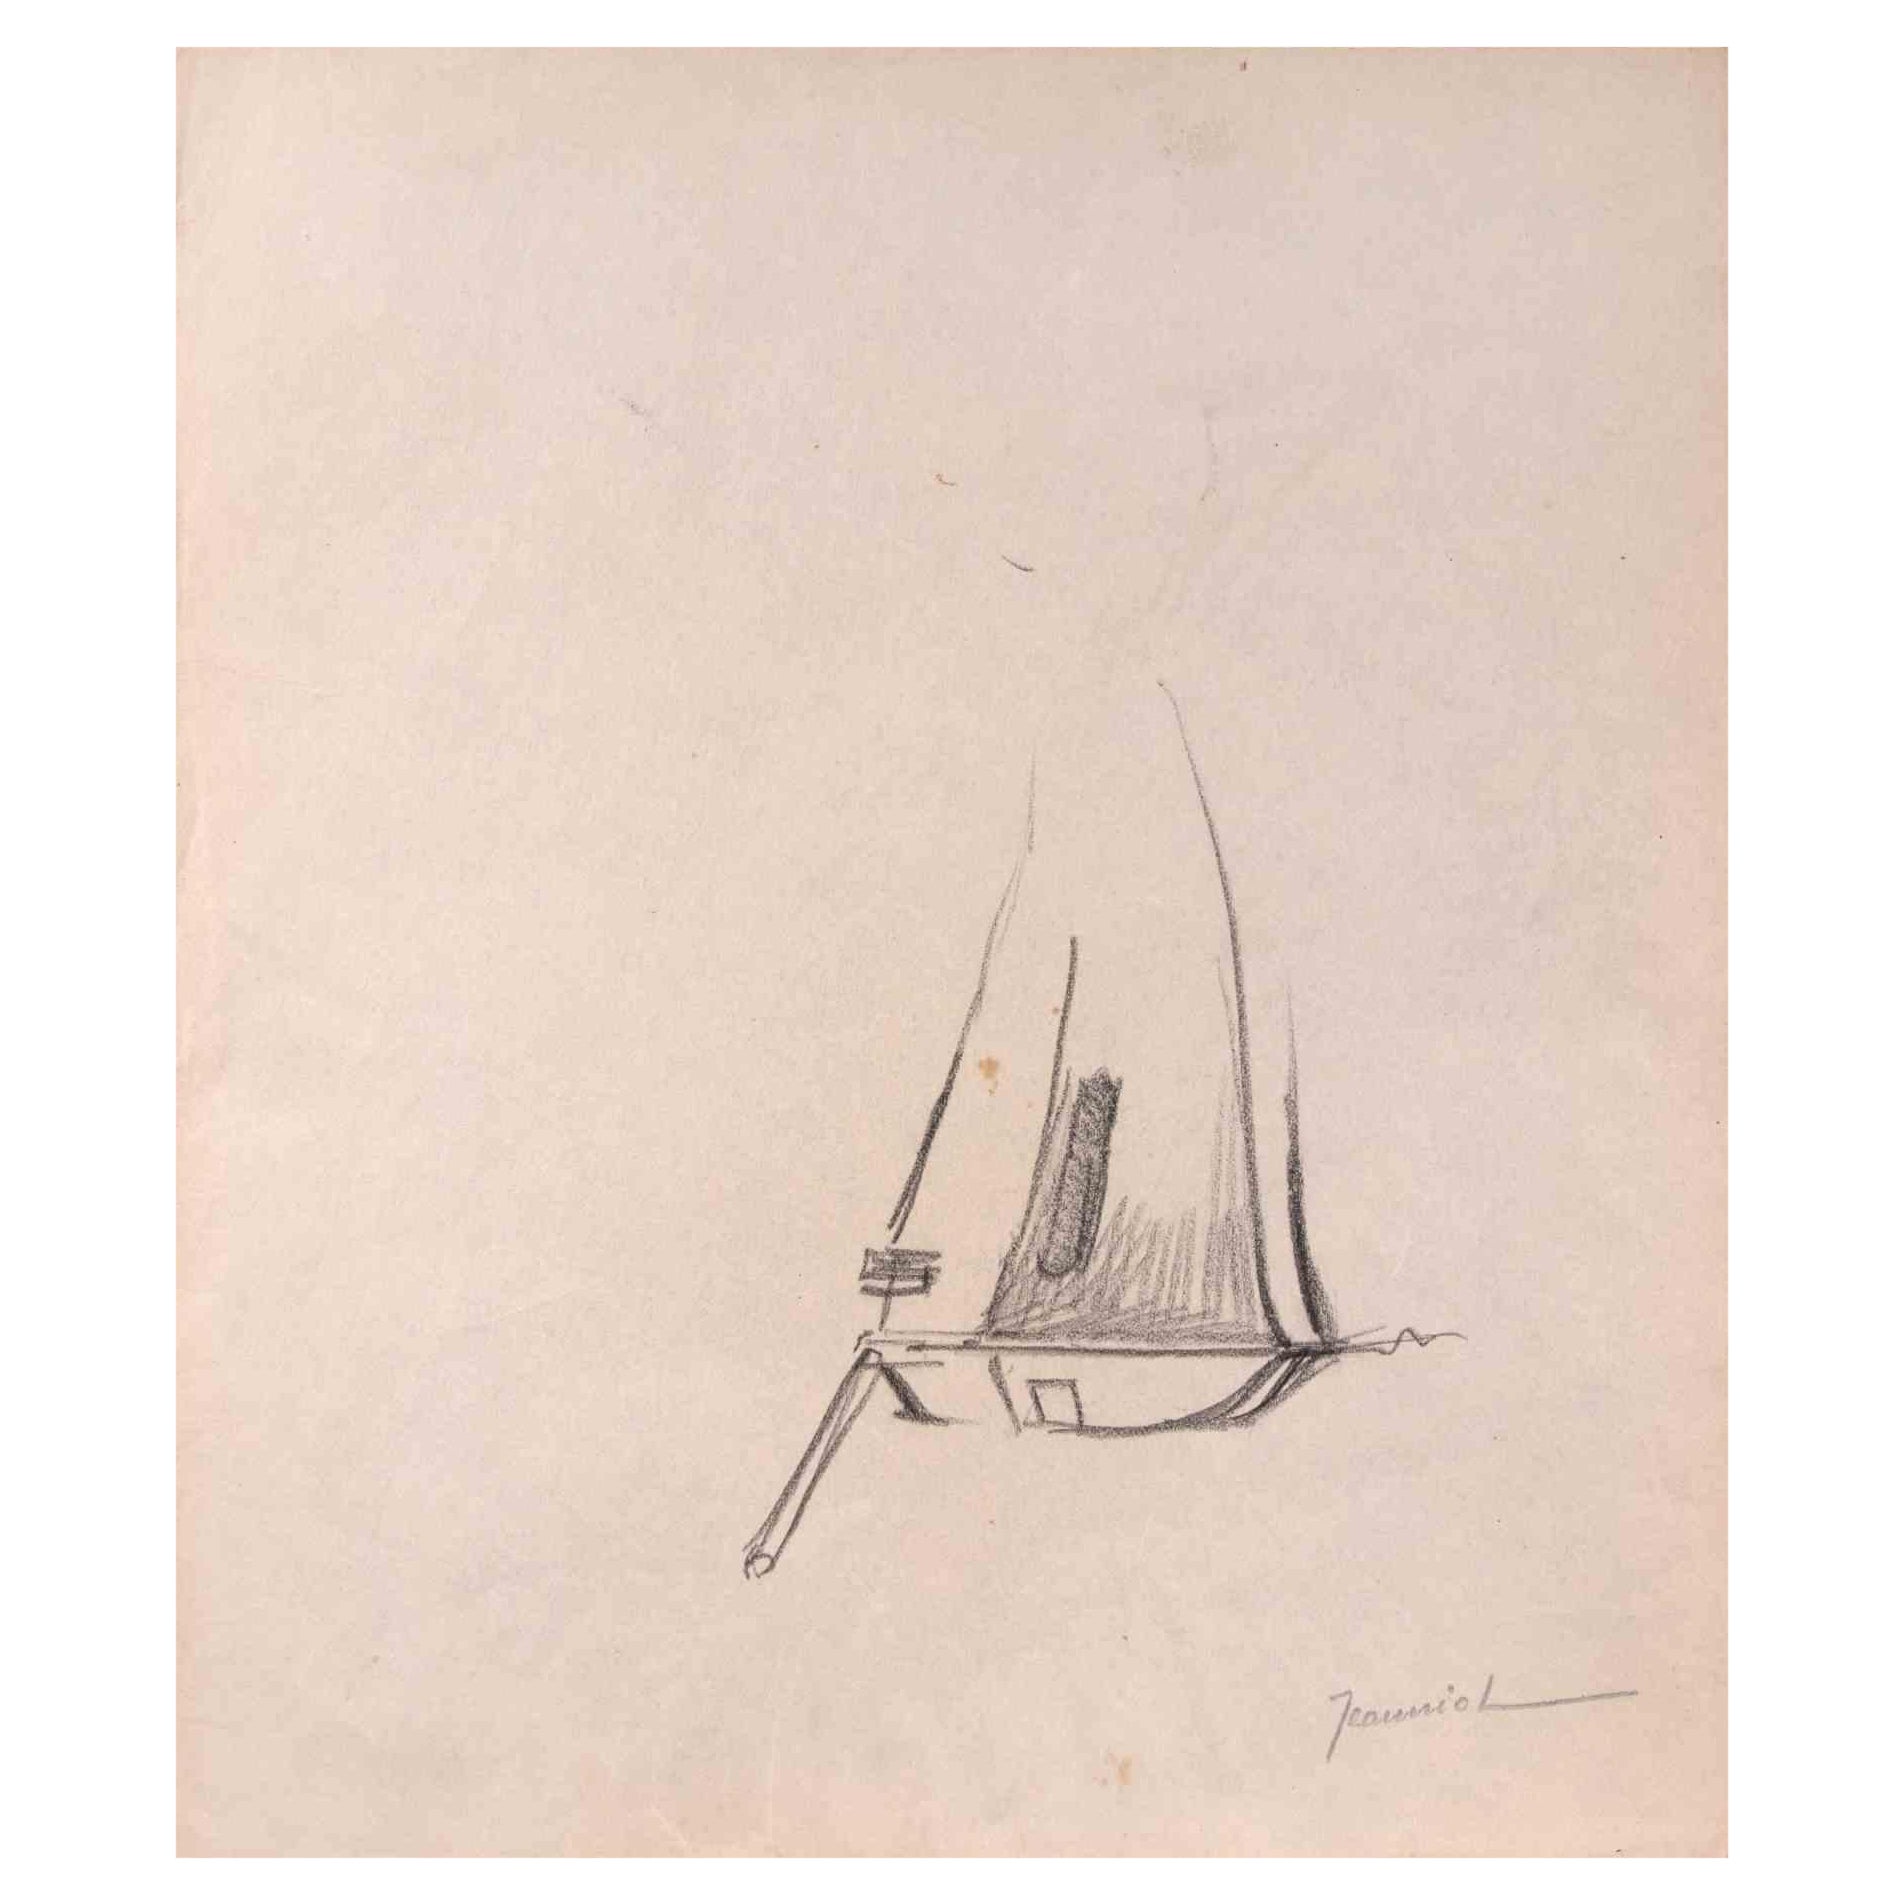 The Boat is an original Drawing on paper realized by painter Pierre Georges Jeanniot (1848-1934).

Drawing in pencil.

Hand-Signed on the lower.

Good conditions with foxing.

Pierre-Georges Jeanniot (1848–1934) was a Swiss-French Impressionist